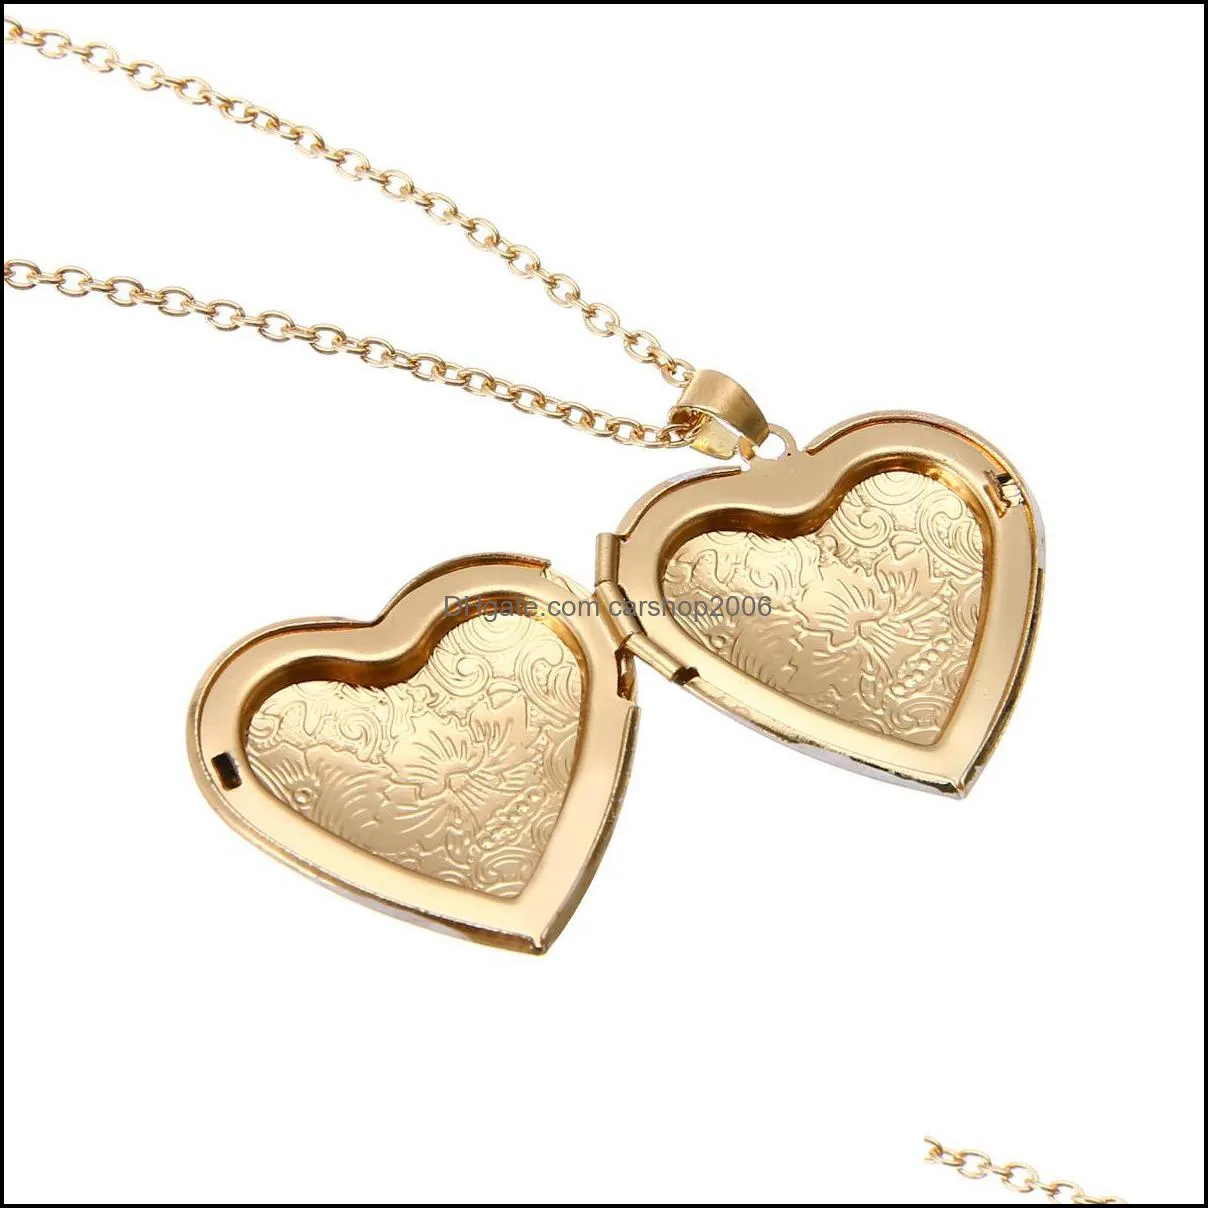 phase box necklace valentine lover gift hollow out water drop shell p o frames open locket necklaces gold plated beautifully carshop2006